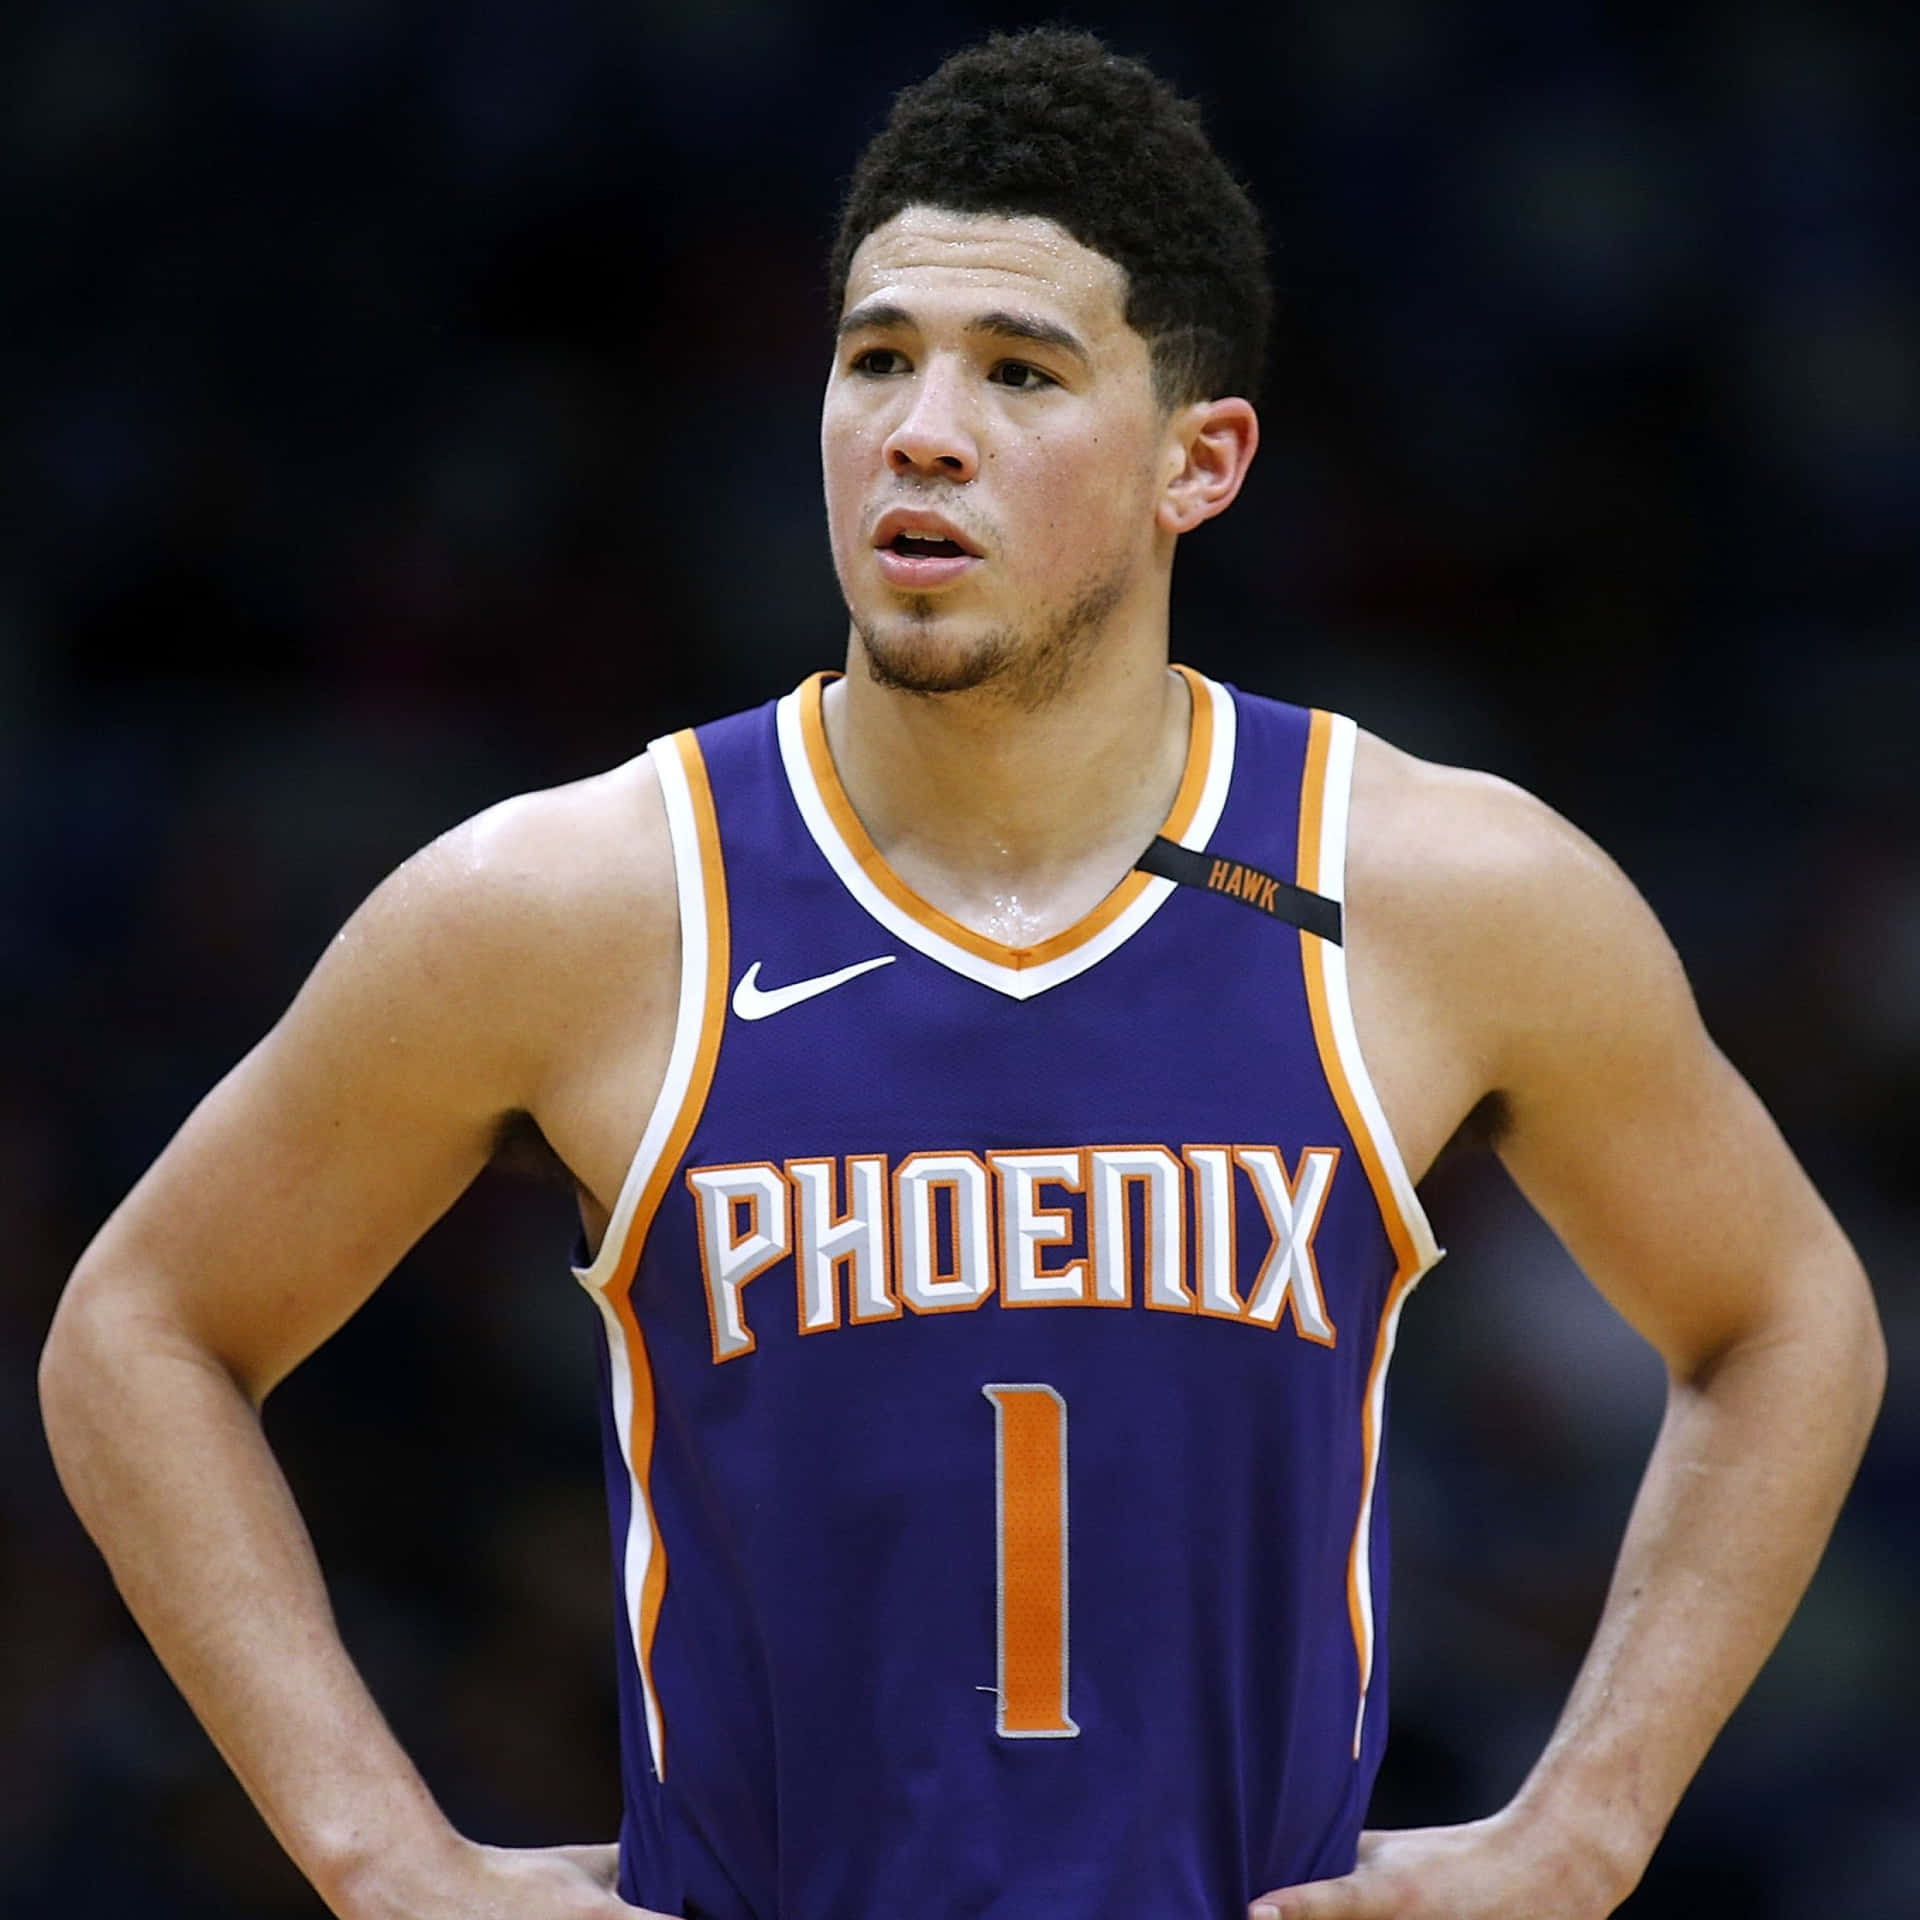 Feel the thrill of victory with Devin Booker's latest iPhone Wallpaper